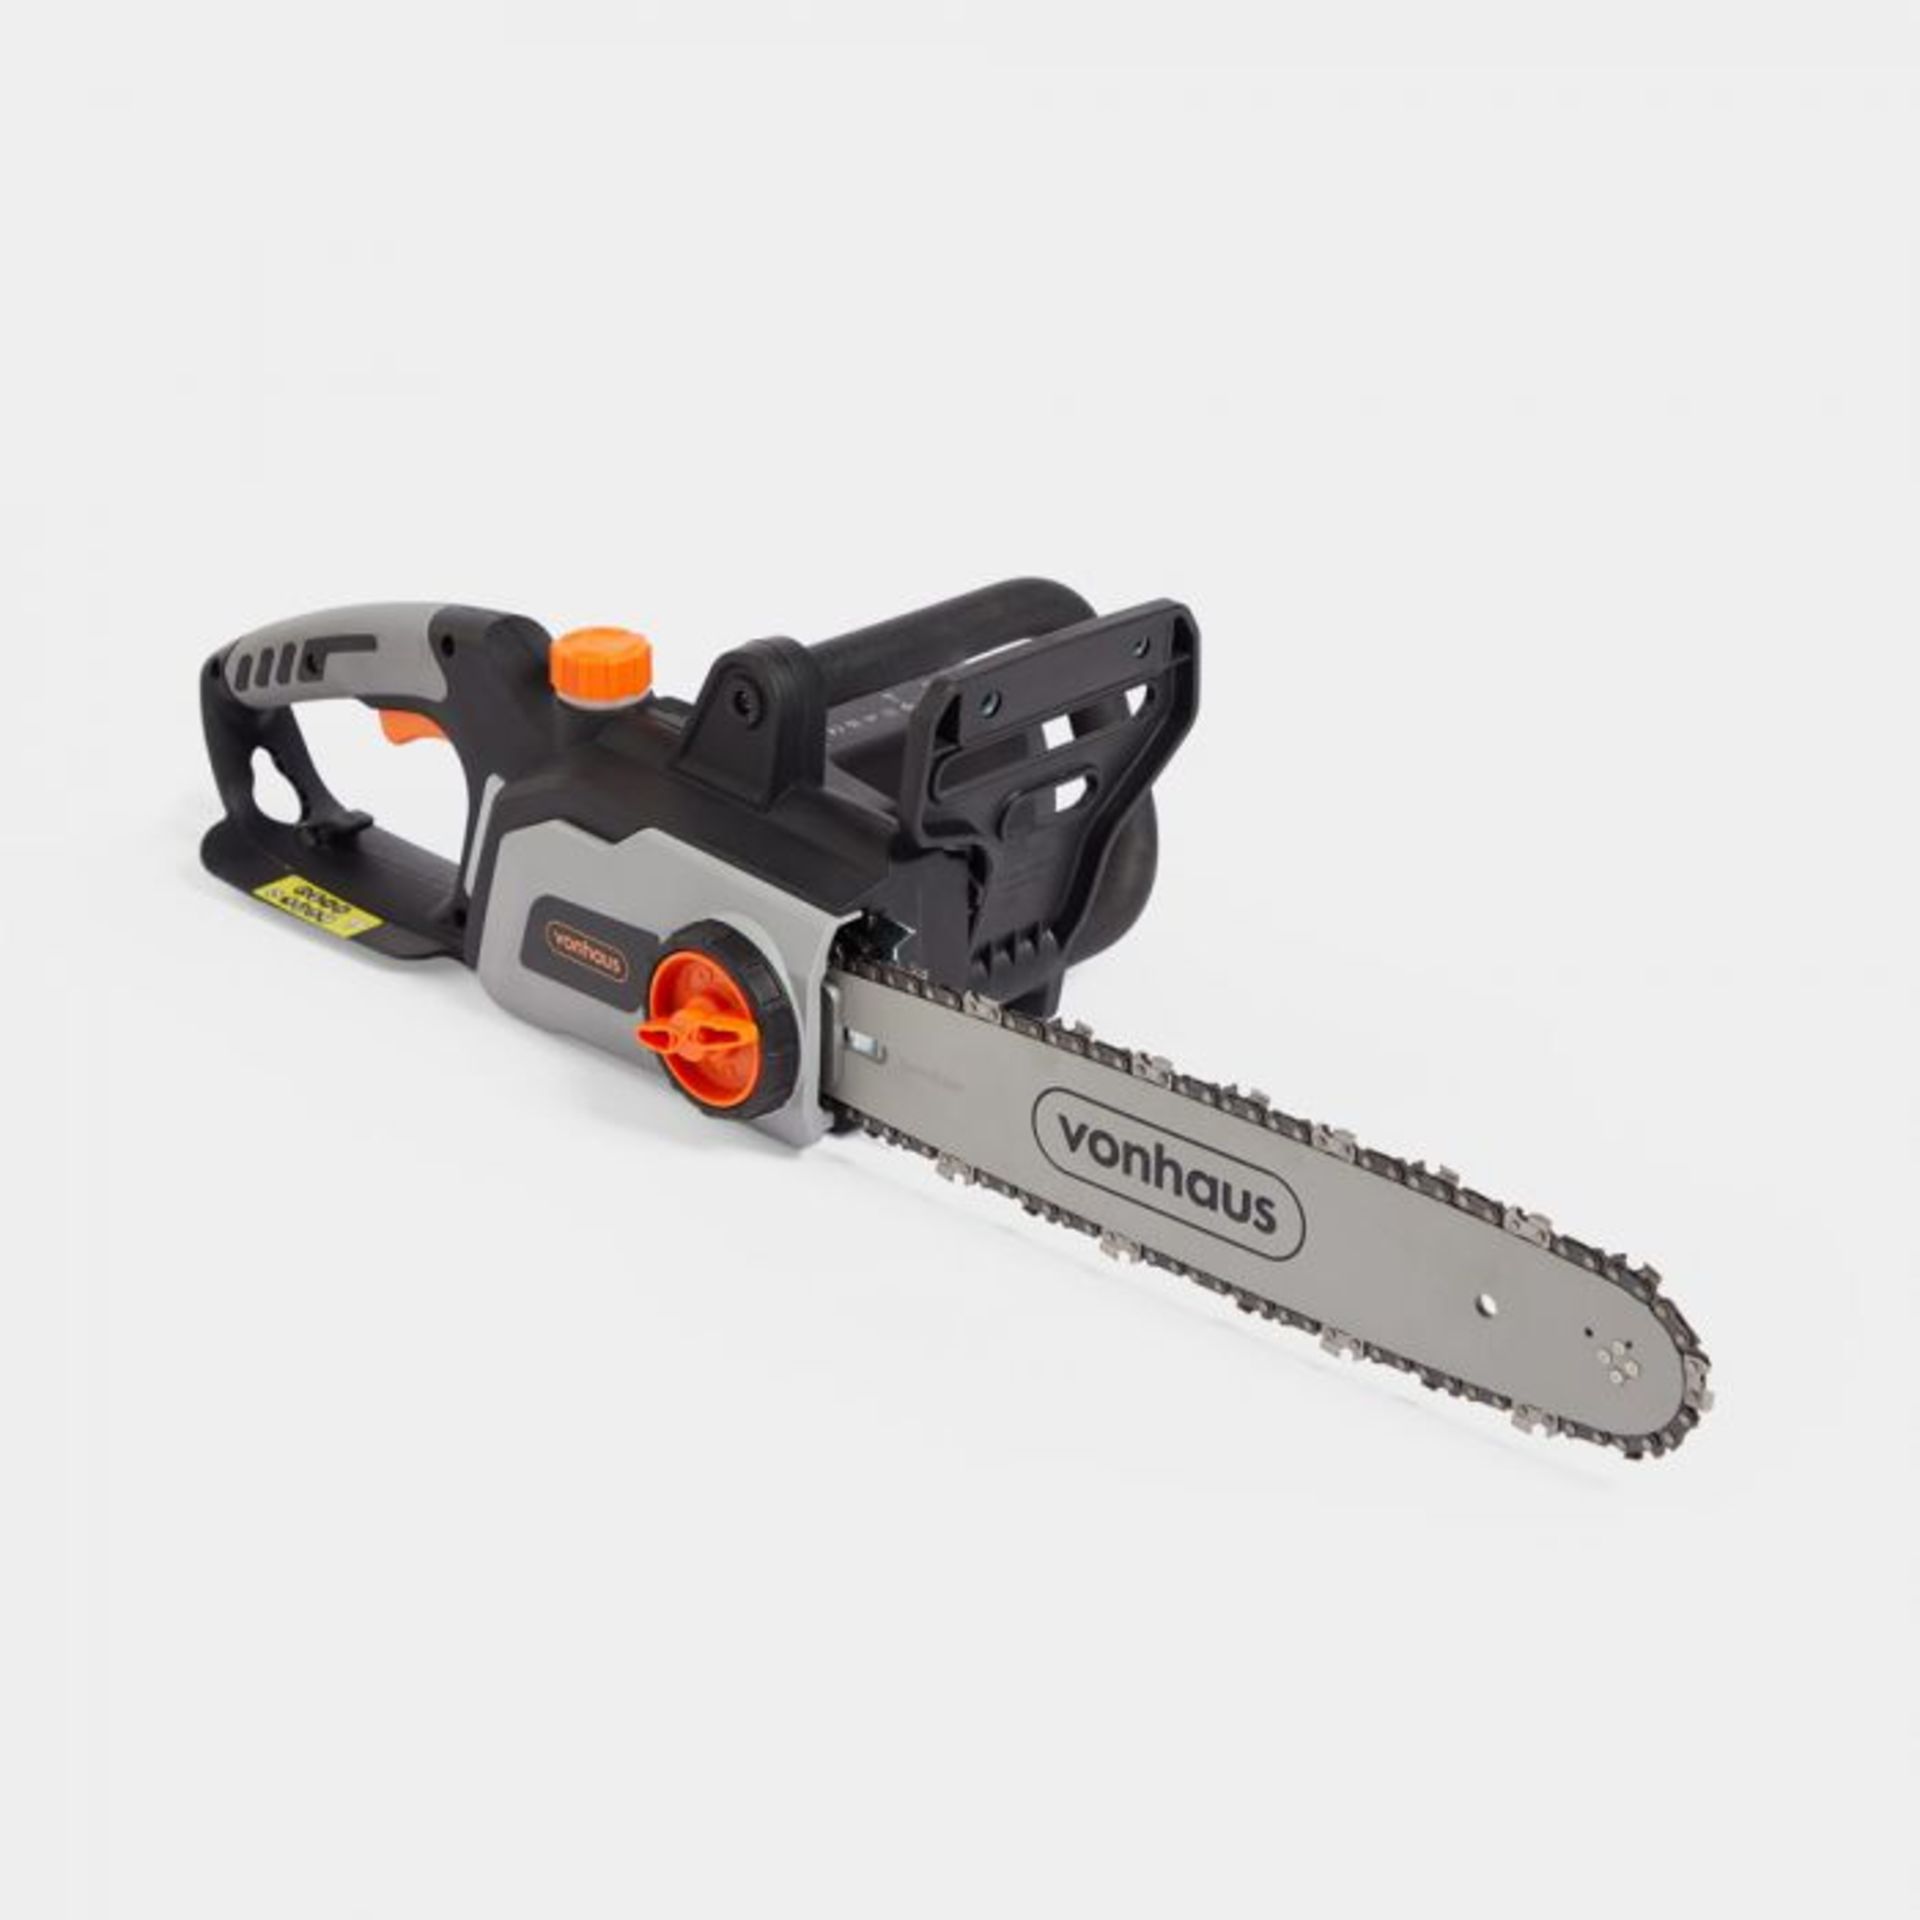 1600W Chainsaw. ake light work of any wood using our powerful 14” 1600W Chainsaw, and adjust the